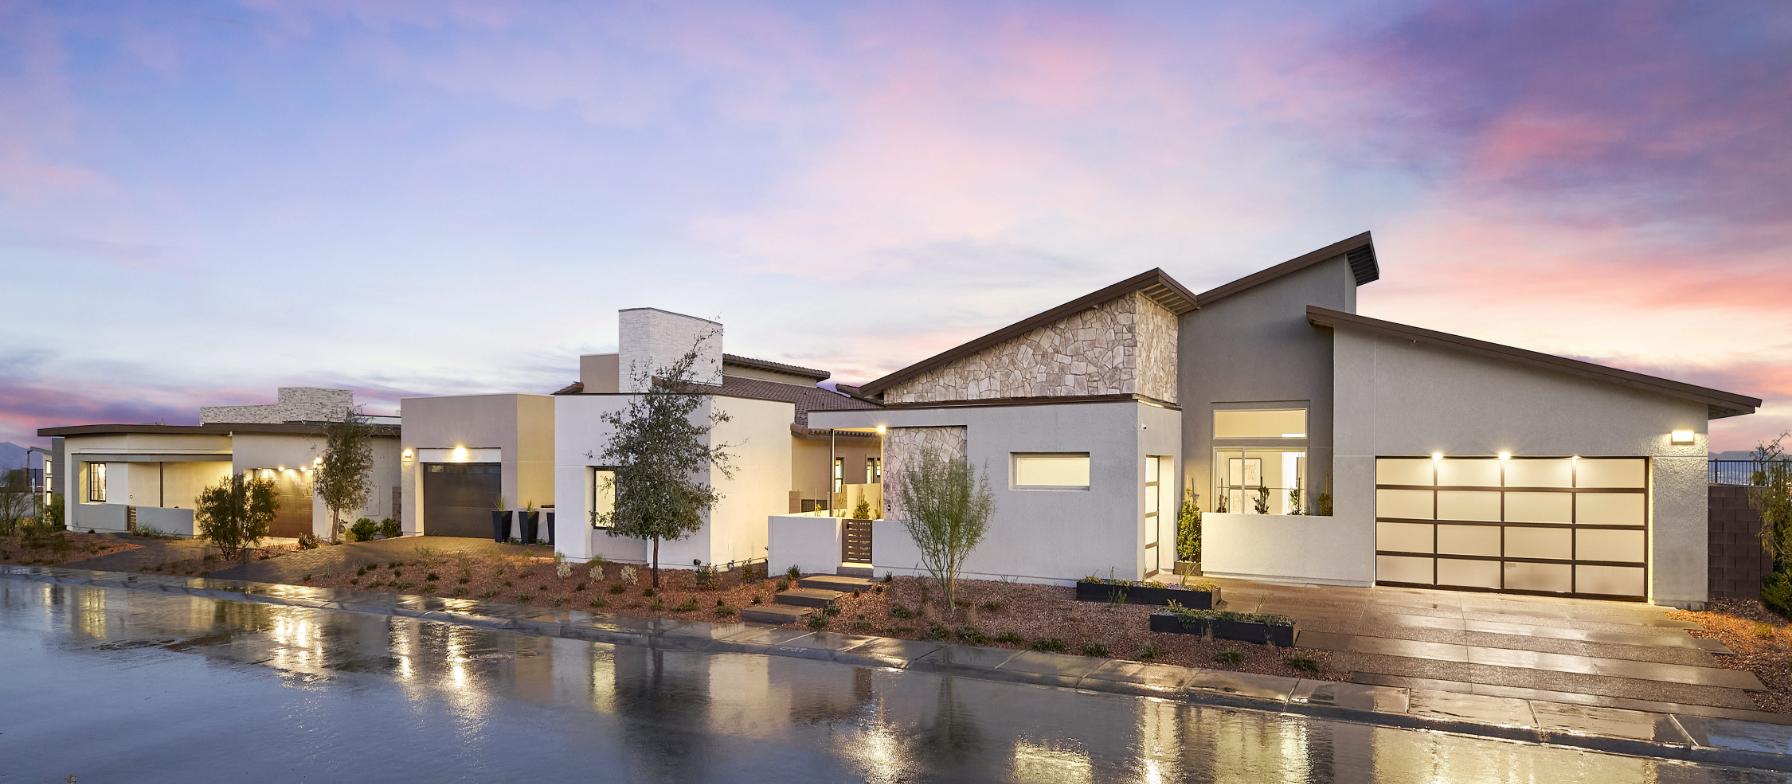 Summerlin New Home Community